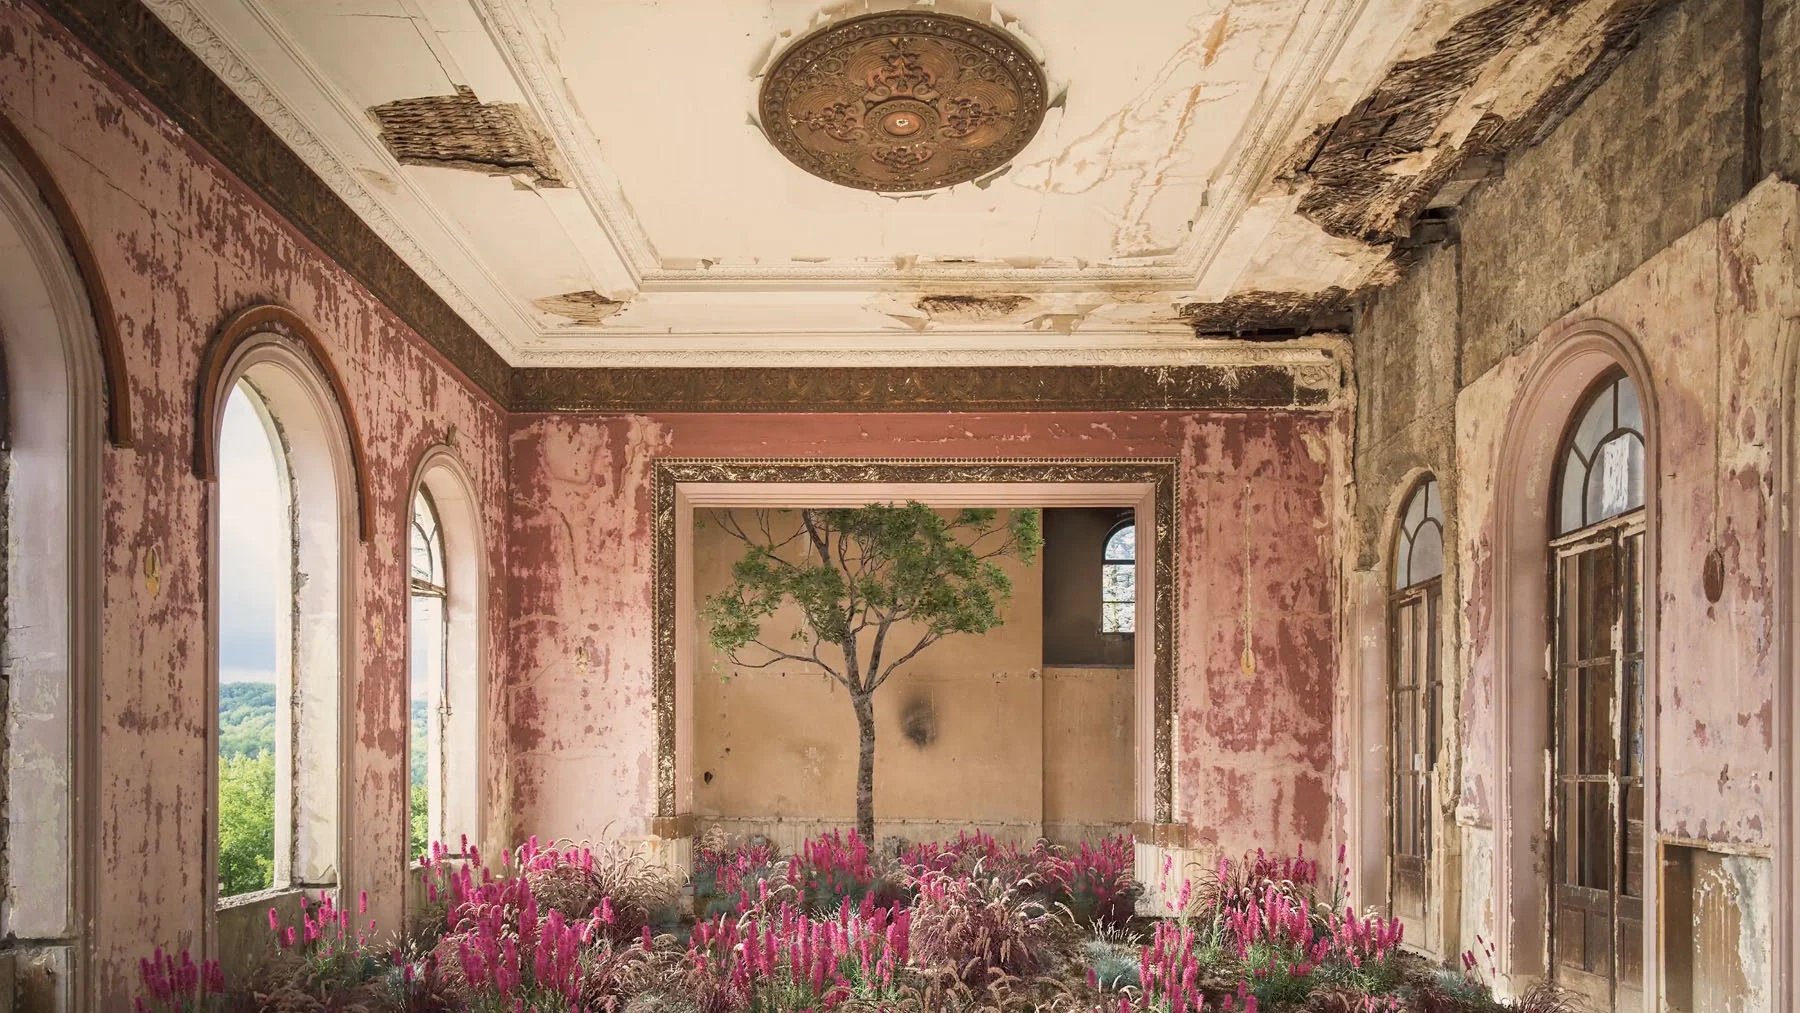 A mixed-media video—created using photography and 3D techniques—a bright red abandoned building interior  located in Georgia, overgrown with red plants and flowers.
